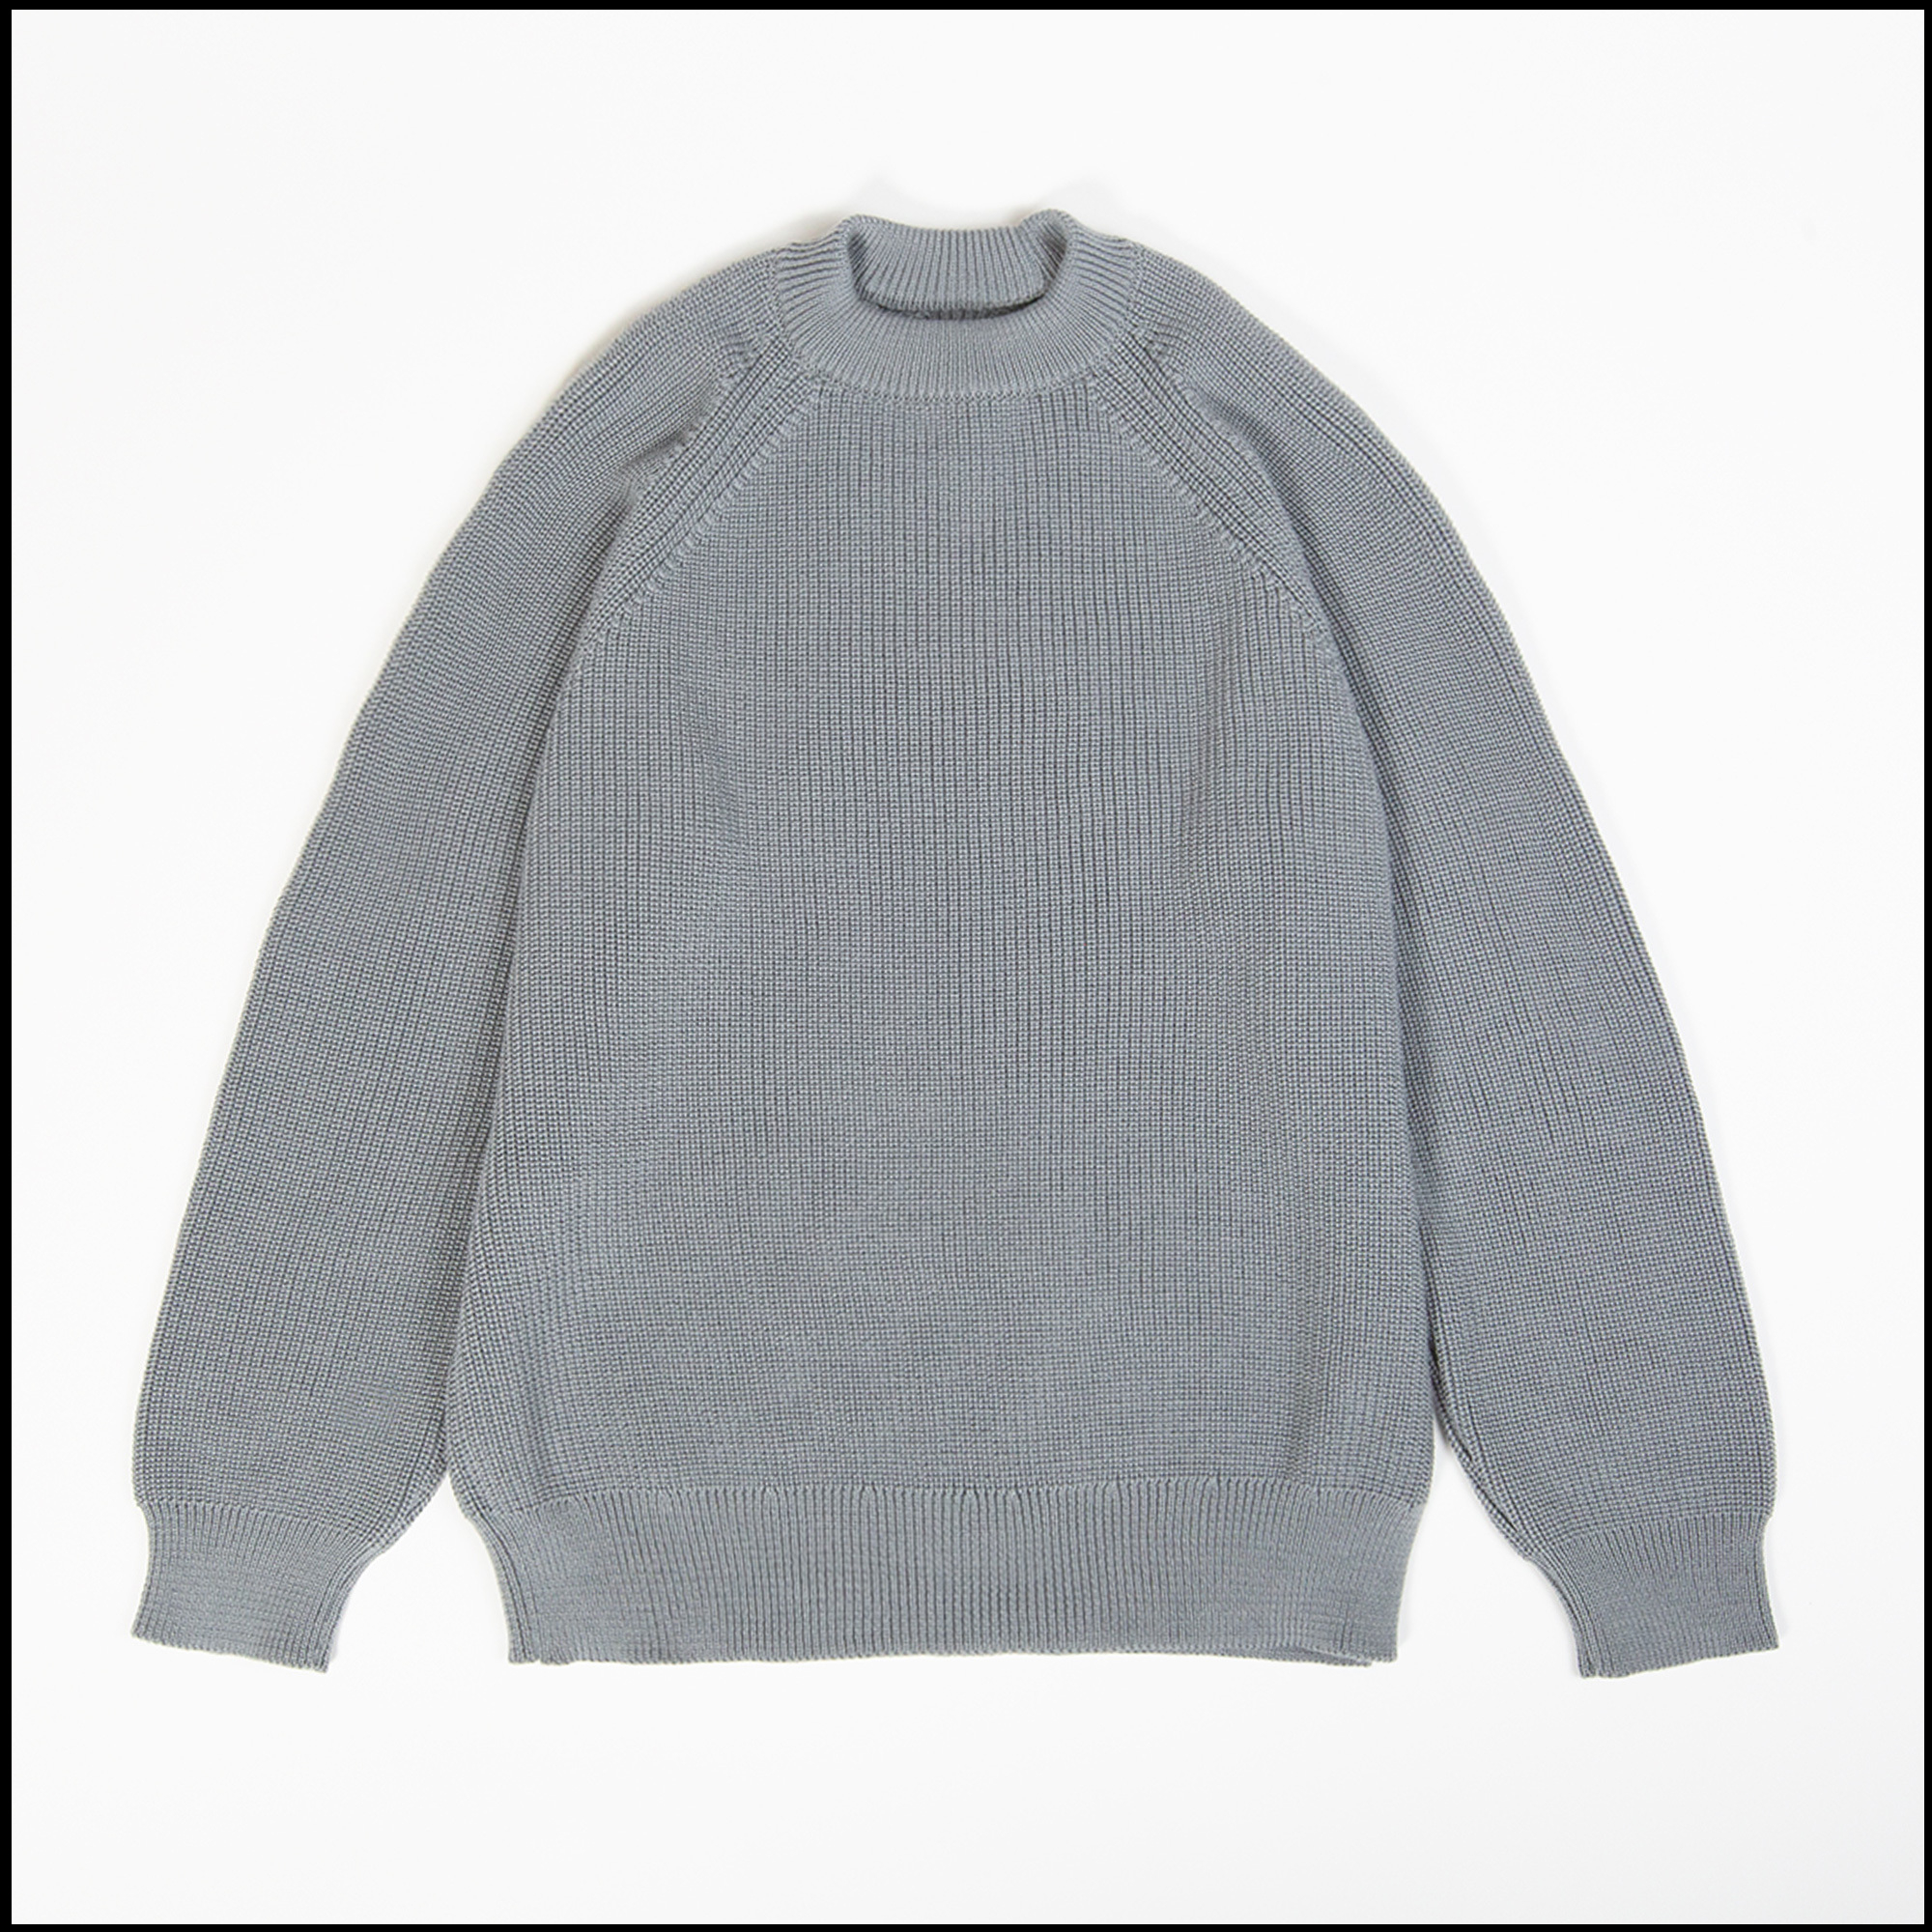 PLANO sweater in Concrete color by Arpenteur